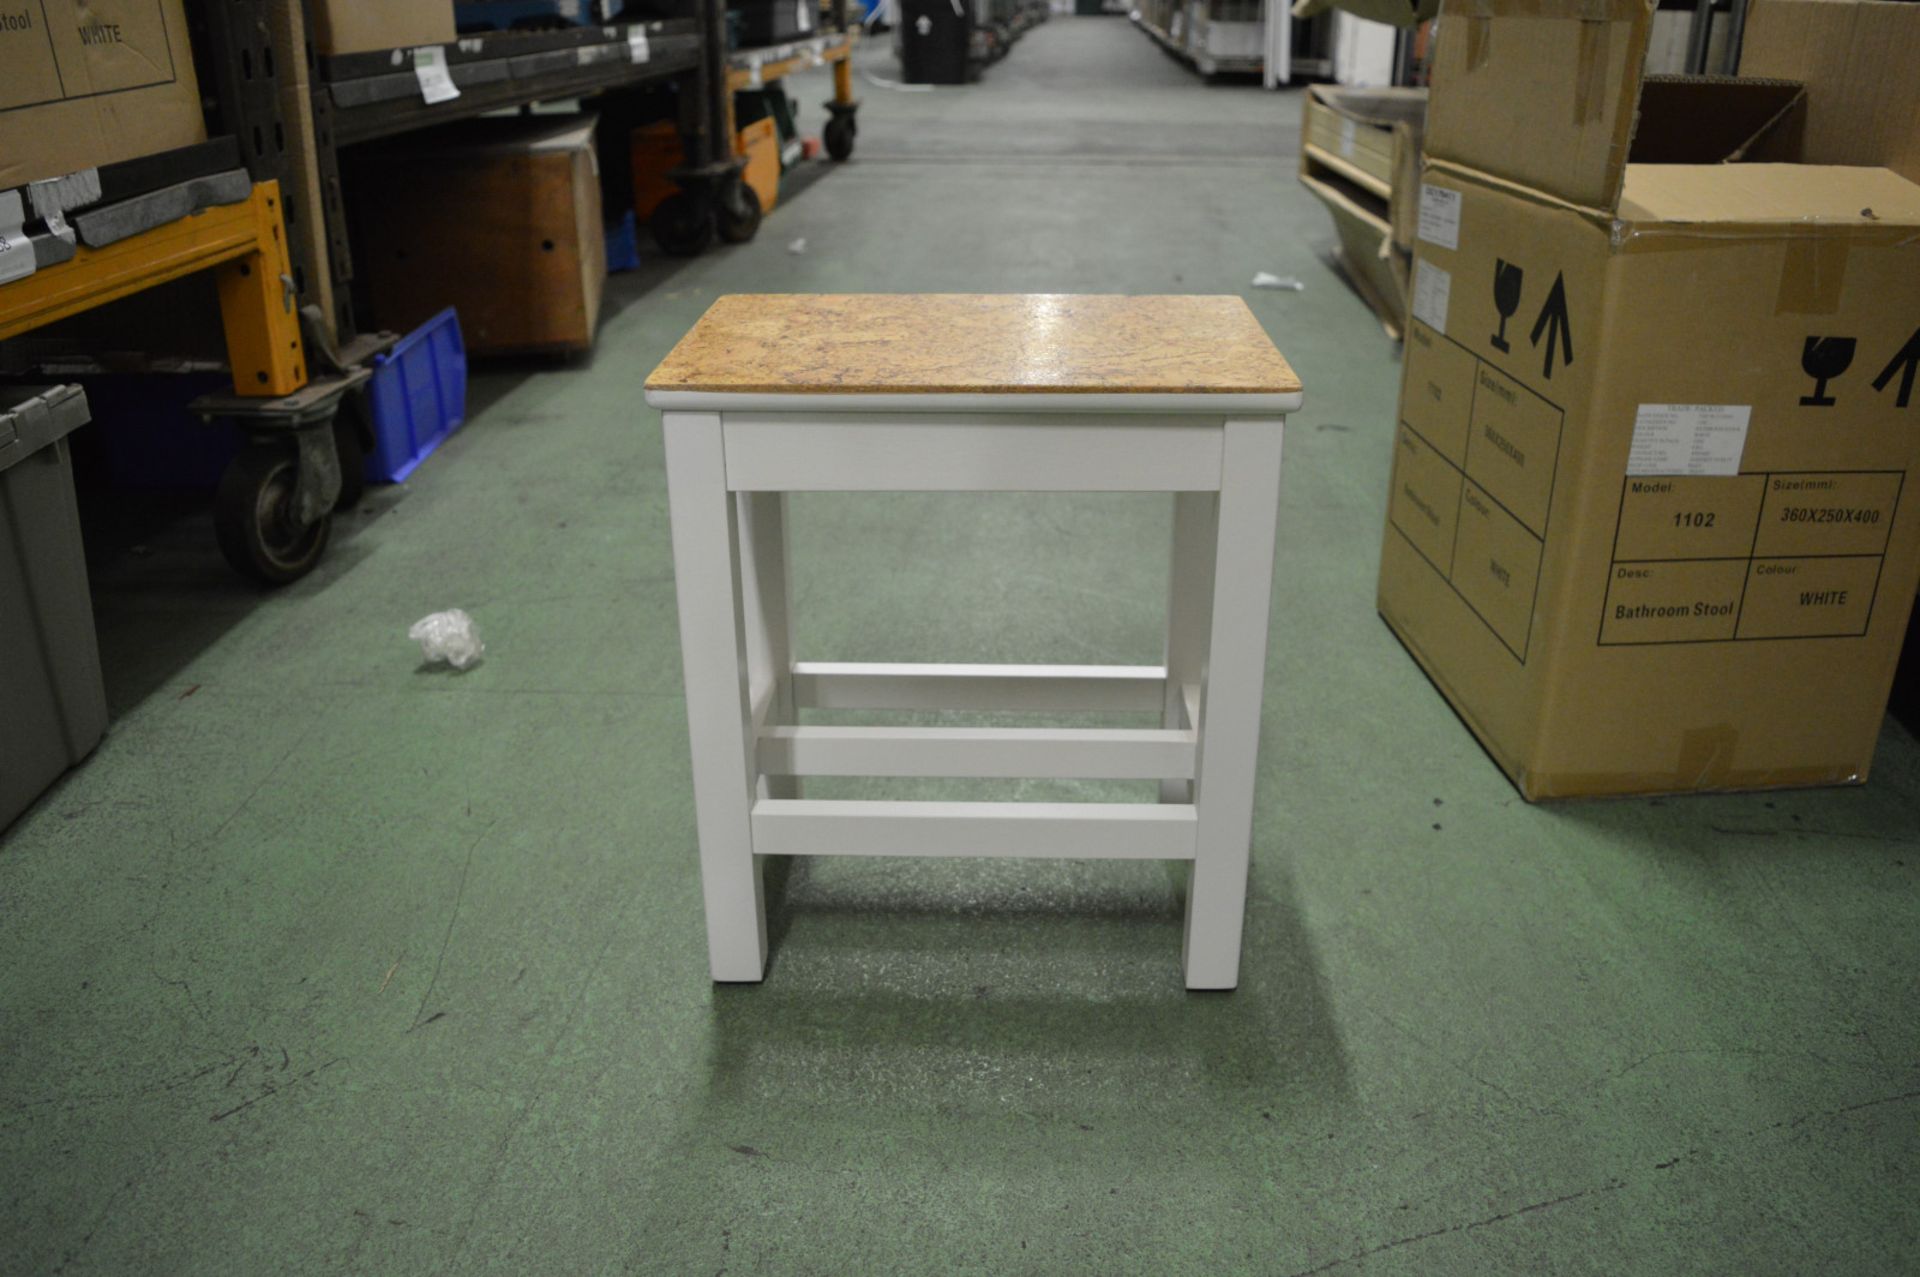 3x Bathroom Stools - White Painted Legs with Cork Seat - Brand new in box. - Image 2 of 2